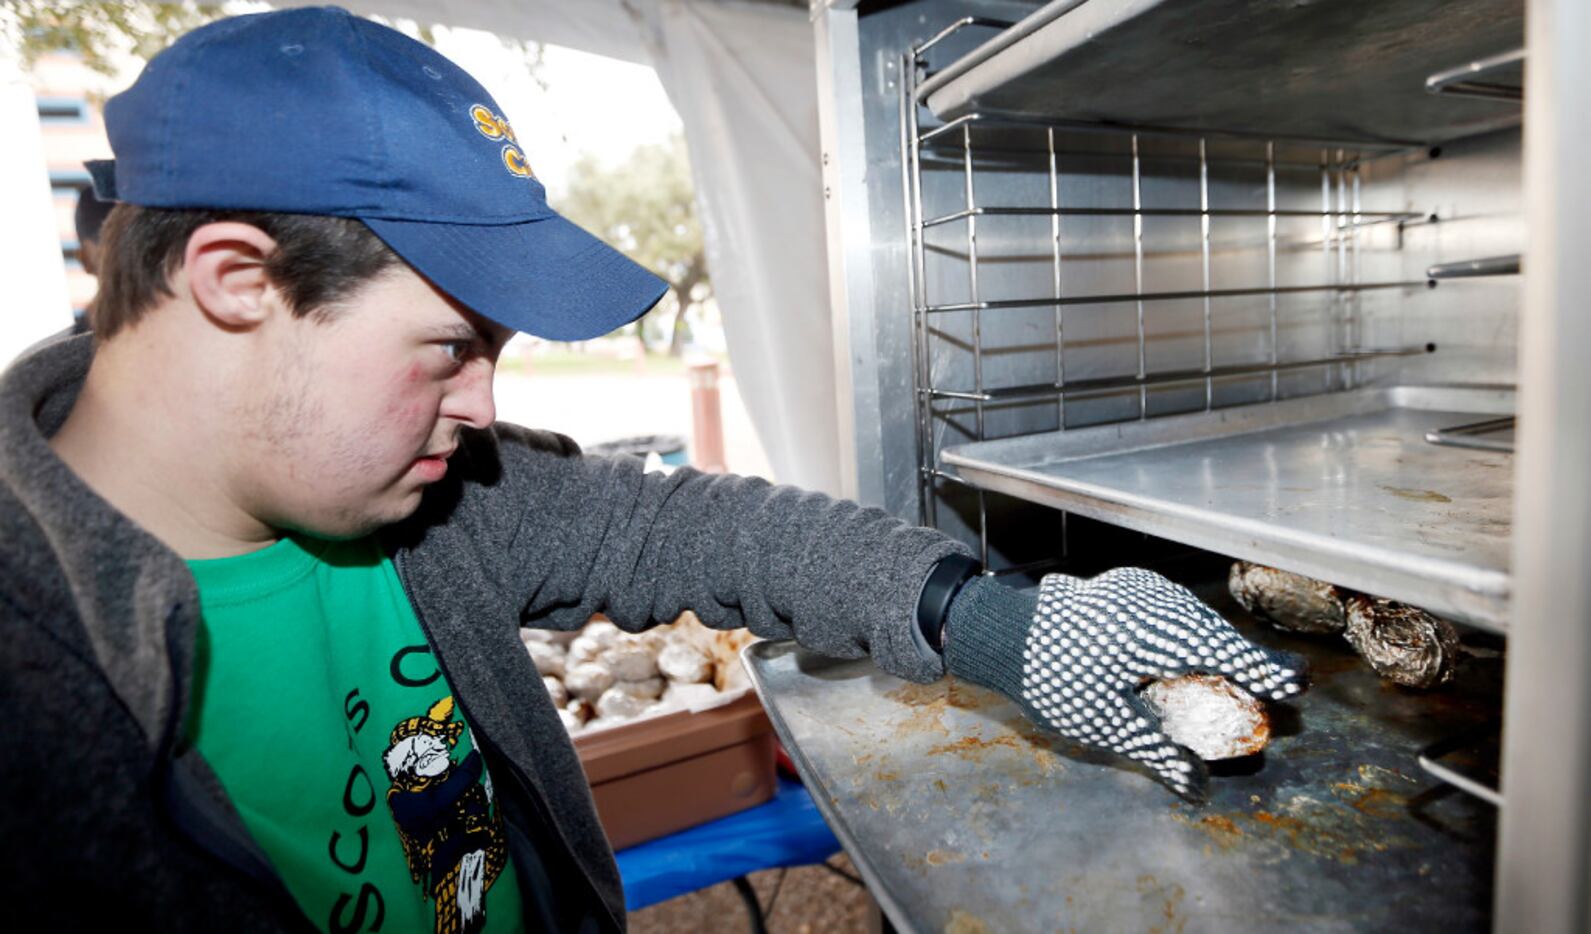 Scots Café student Ben Acker transferred baked potatoes into a hotbox to await sale during...